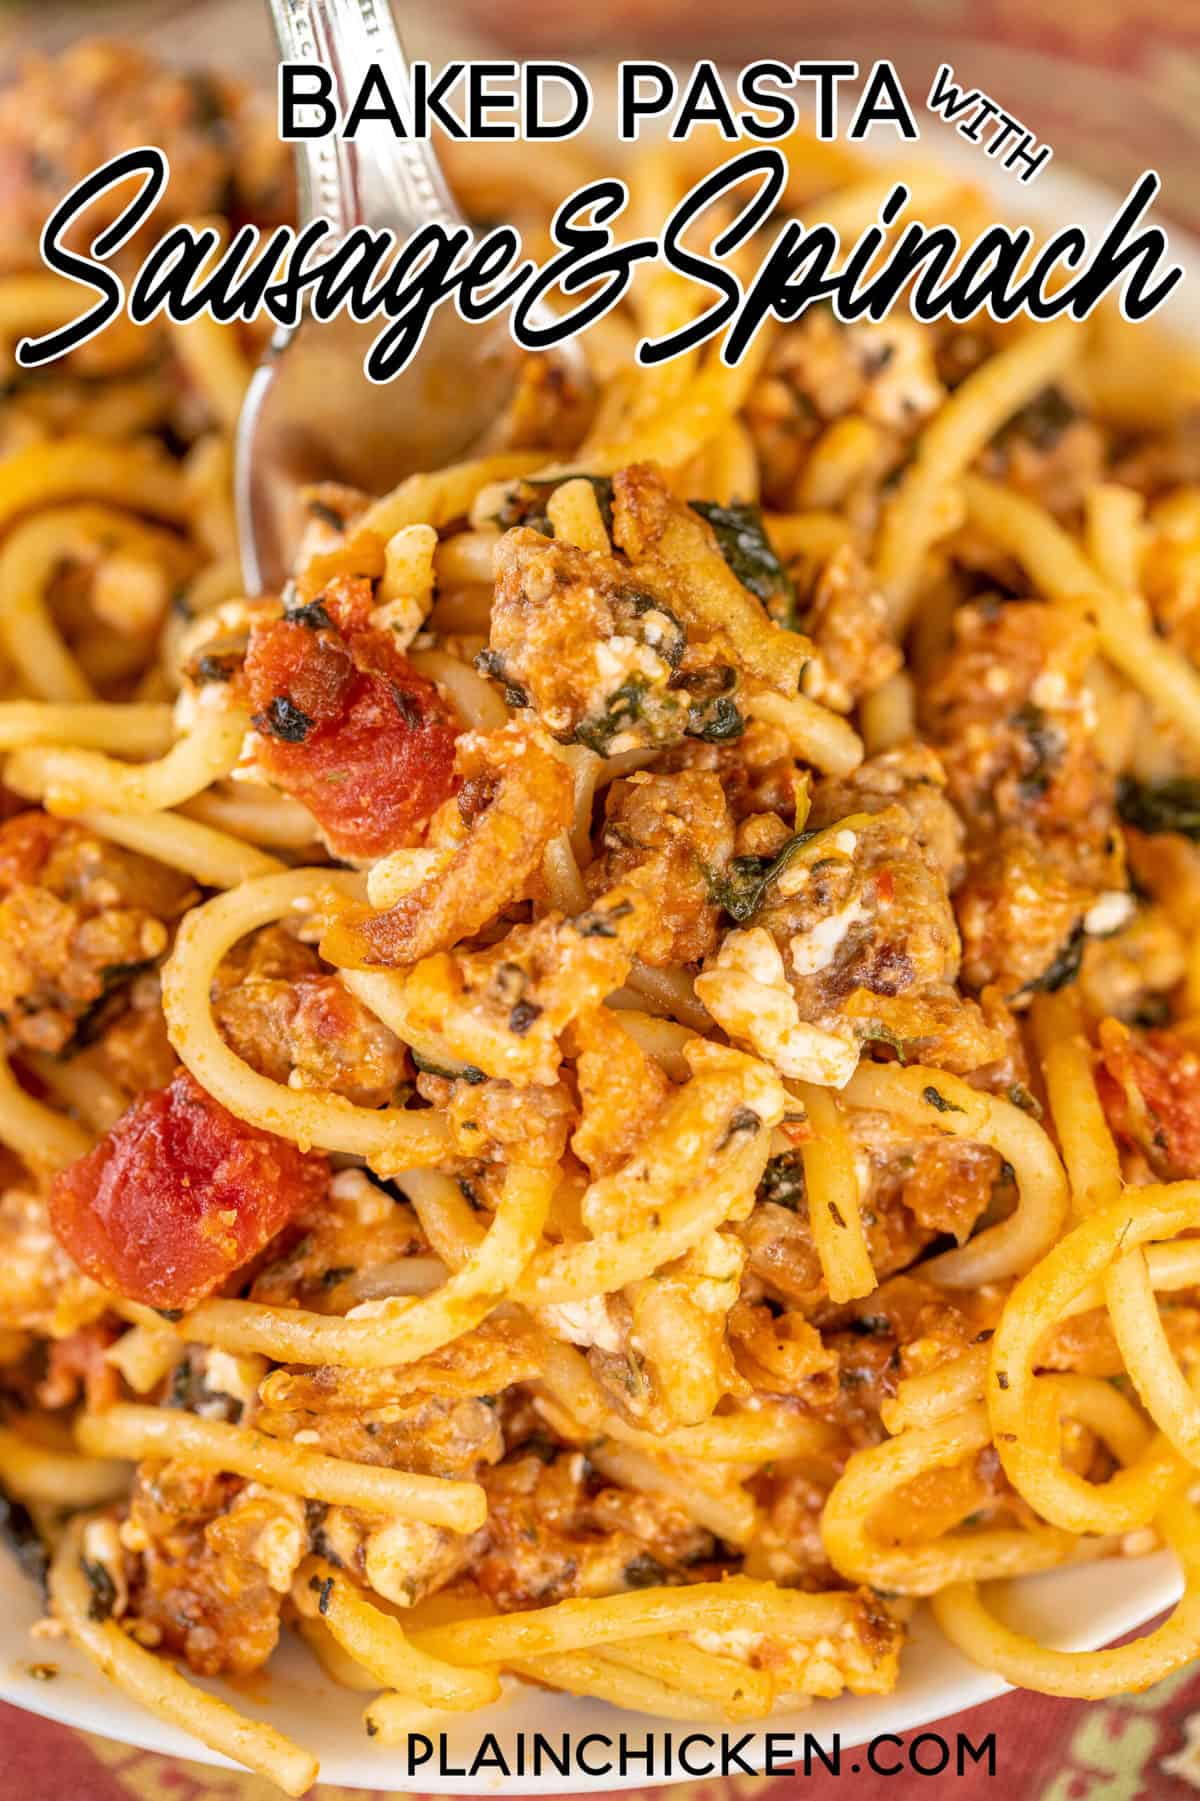 Baked Pasta With Sausage Spinach Plain Chicken,Wedding Recessional Songs